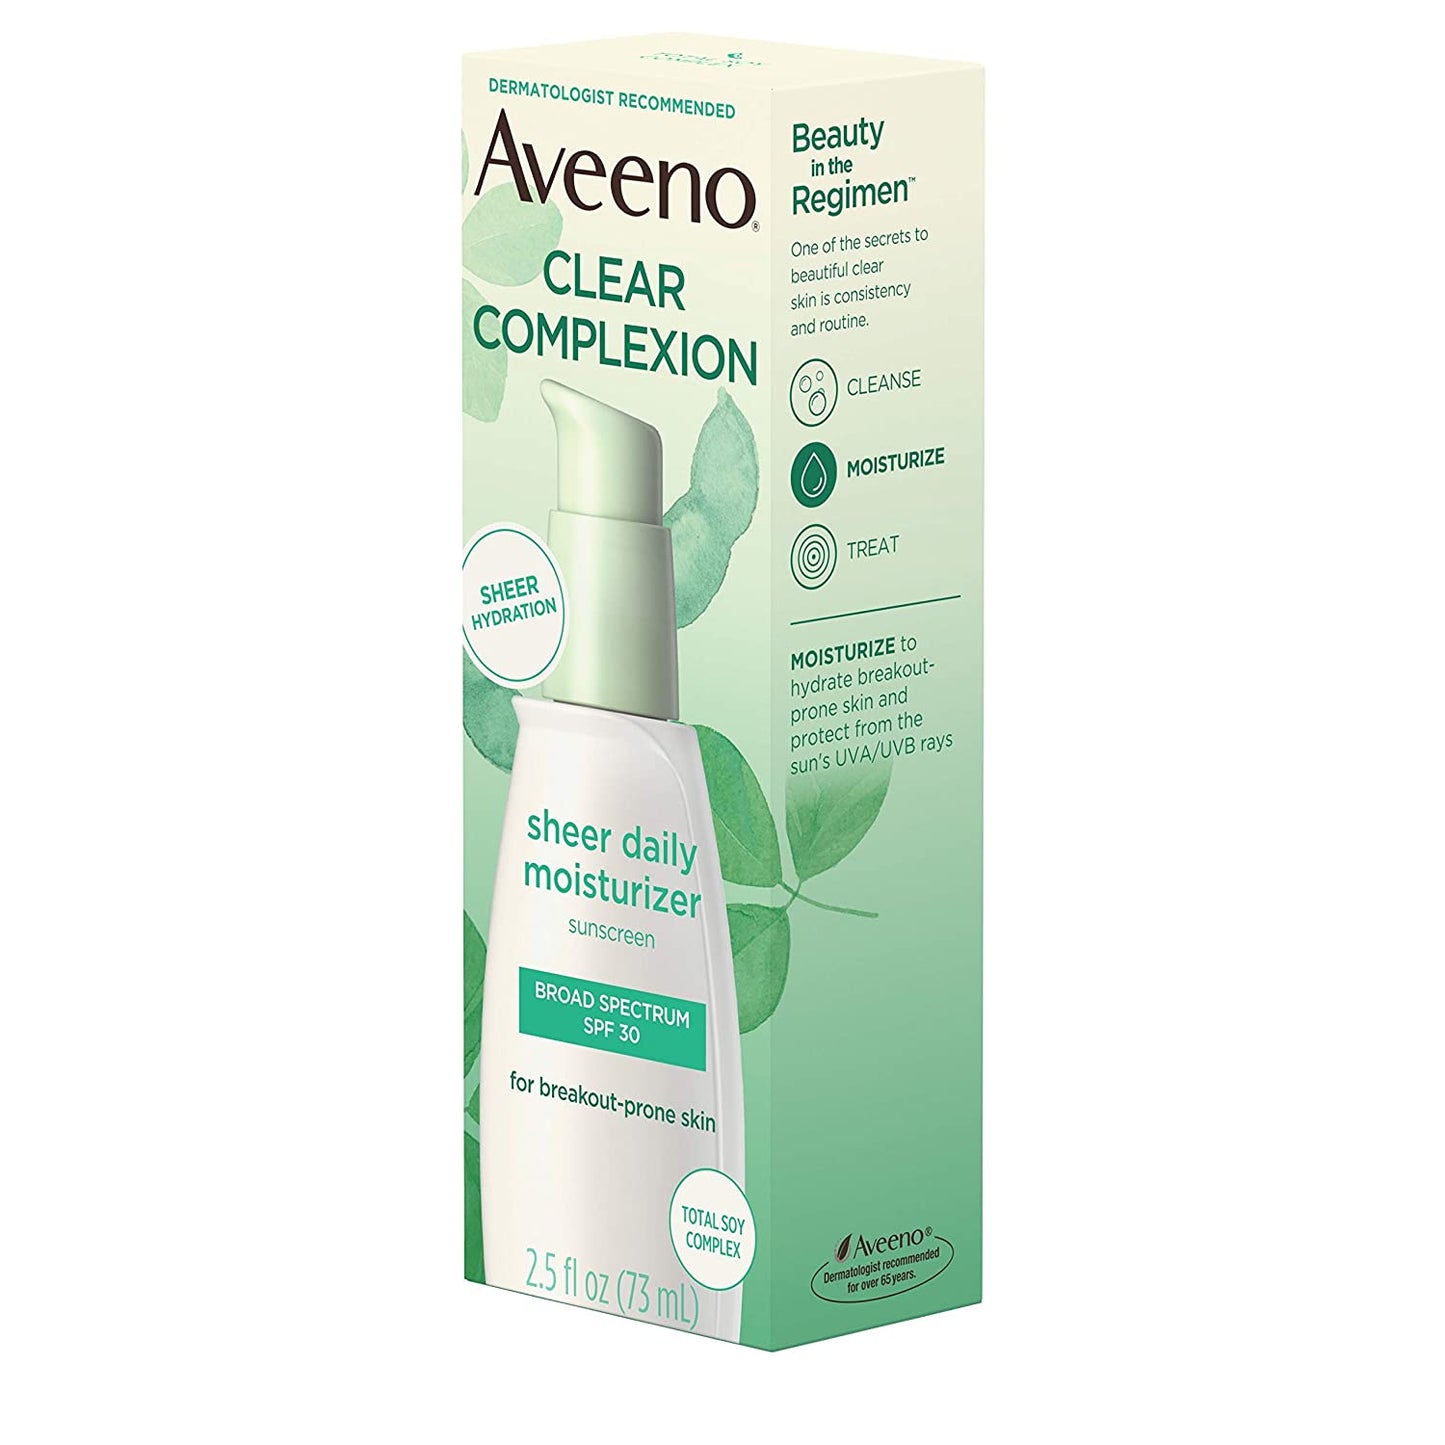 Aveeno Clear Complexion Sheer Daily Face Moisturizer with SPF 30, 2.5 fl.oz / 73 ml